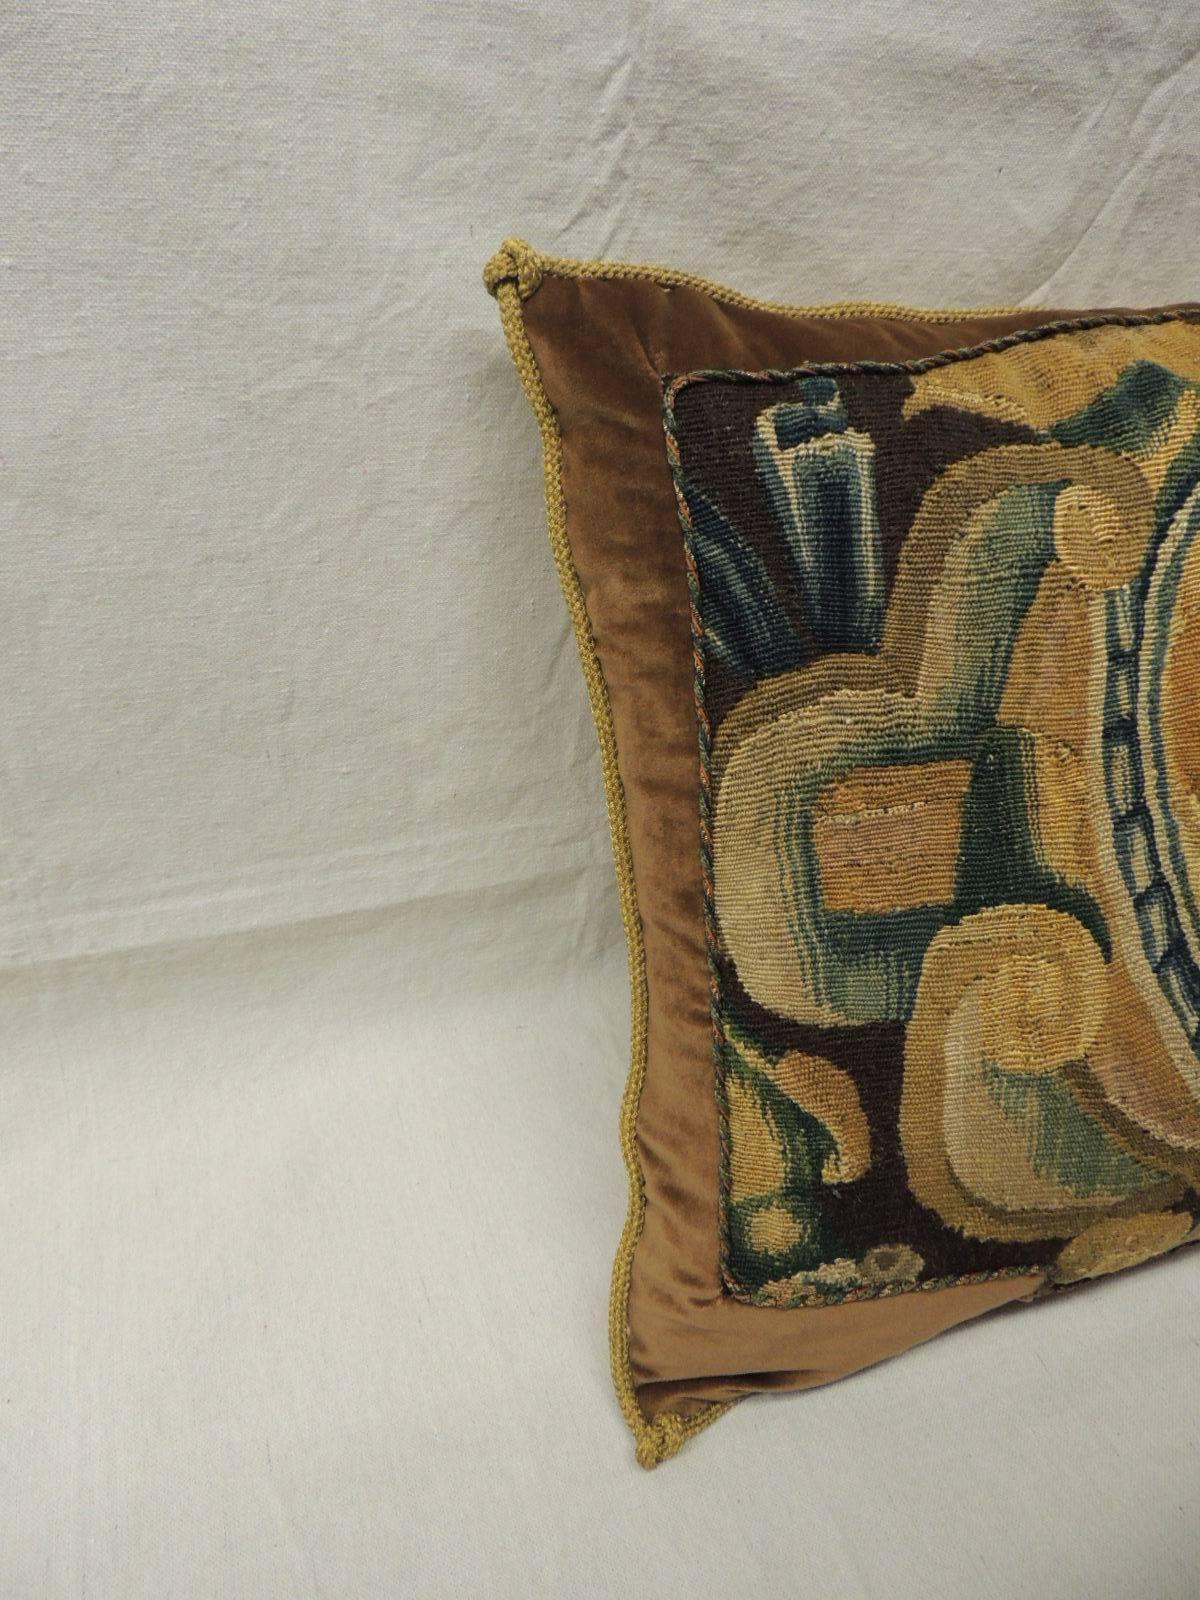 18th C. Verdure tapestry pillow with silk velvet frame accentuated with custom twisted silk cords in shades of orange, gold and green.  Antique metallic rope trim all around and yellow silk backing.    
Antique tapestry depicts flowers and fruits in